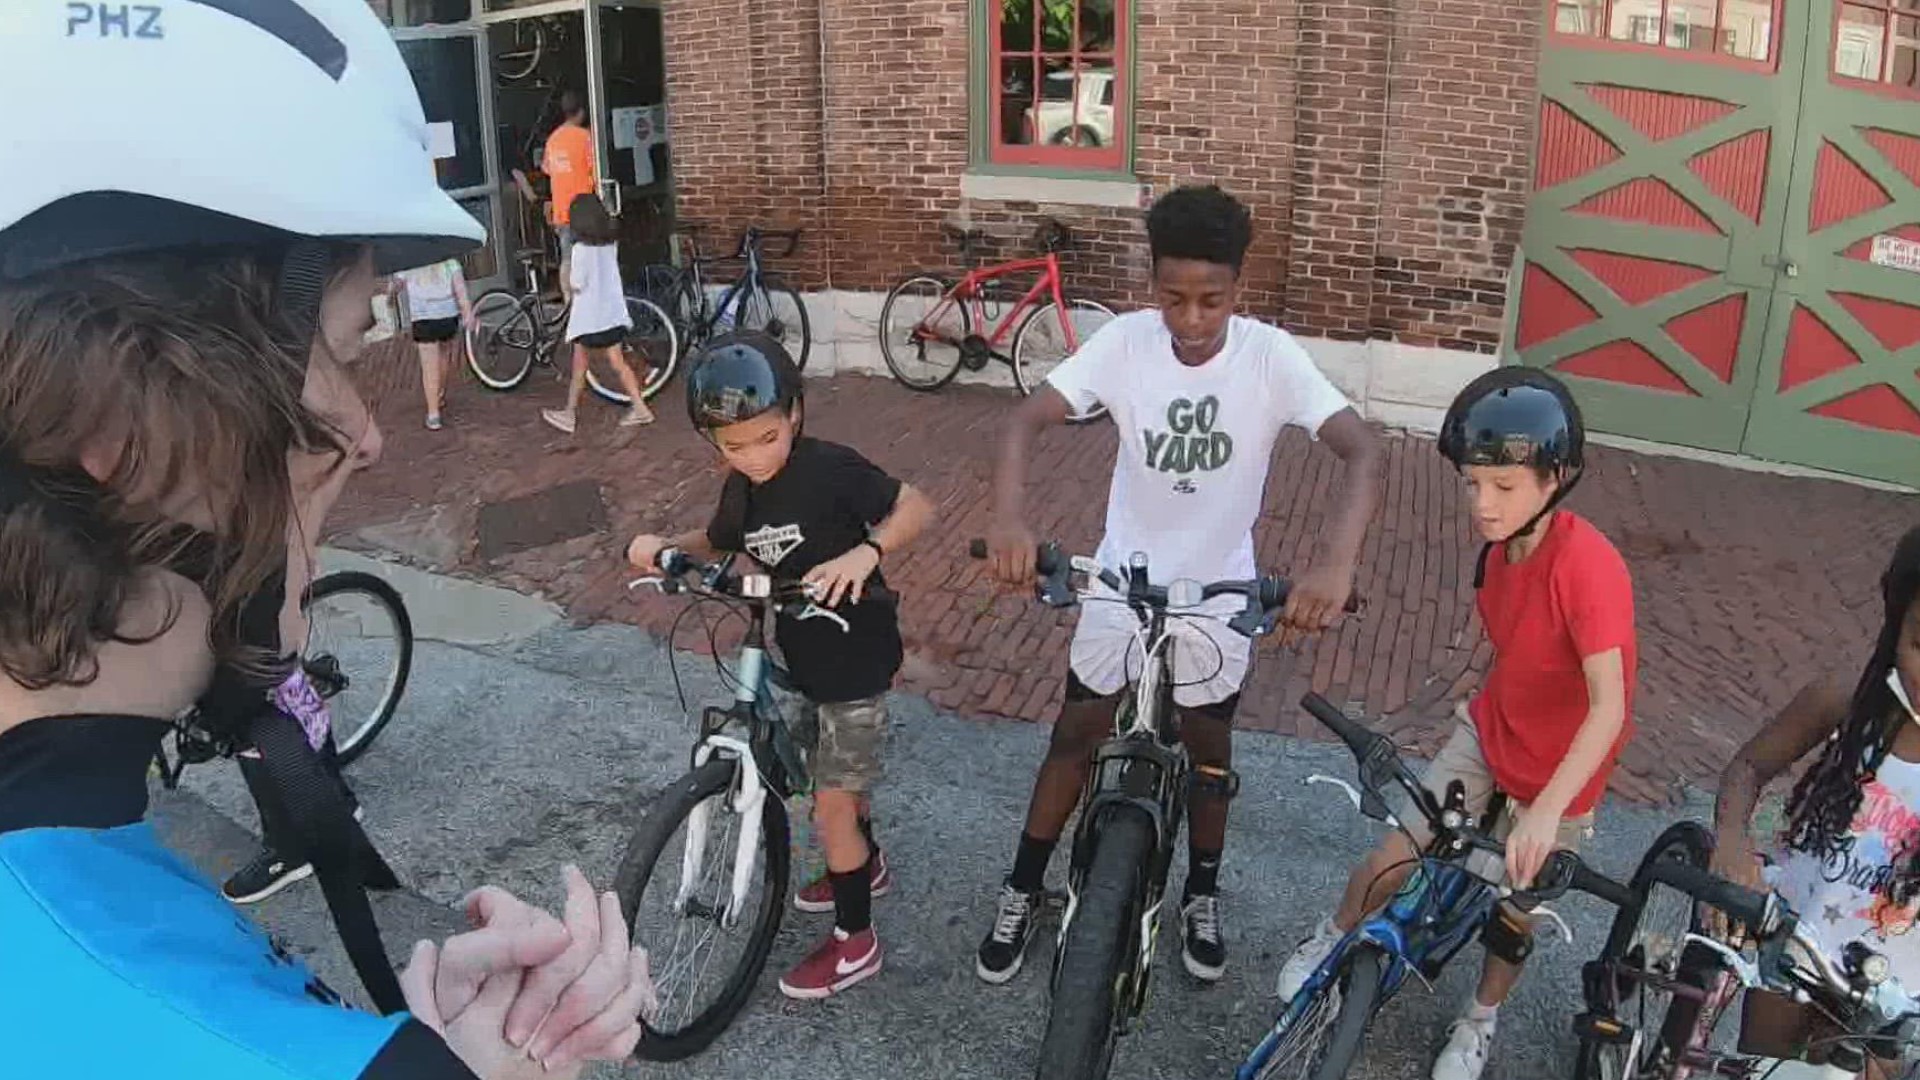 In St. Louis, there are organizations focused on showing kids what's possible in their world. BWorks does that with bicycles.